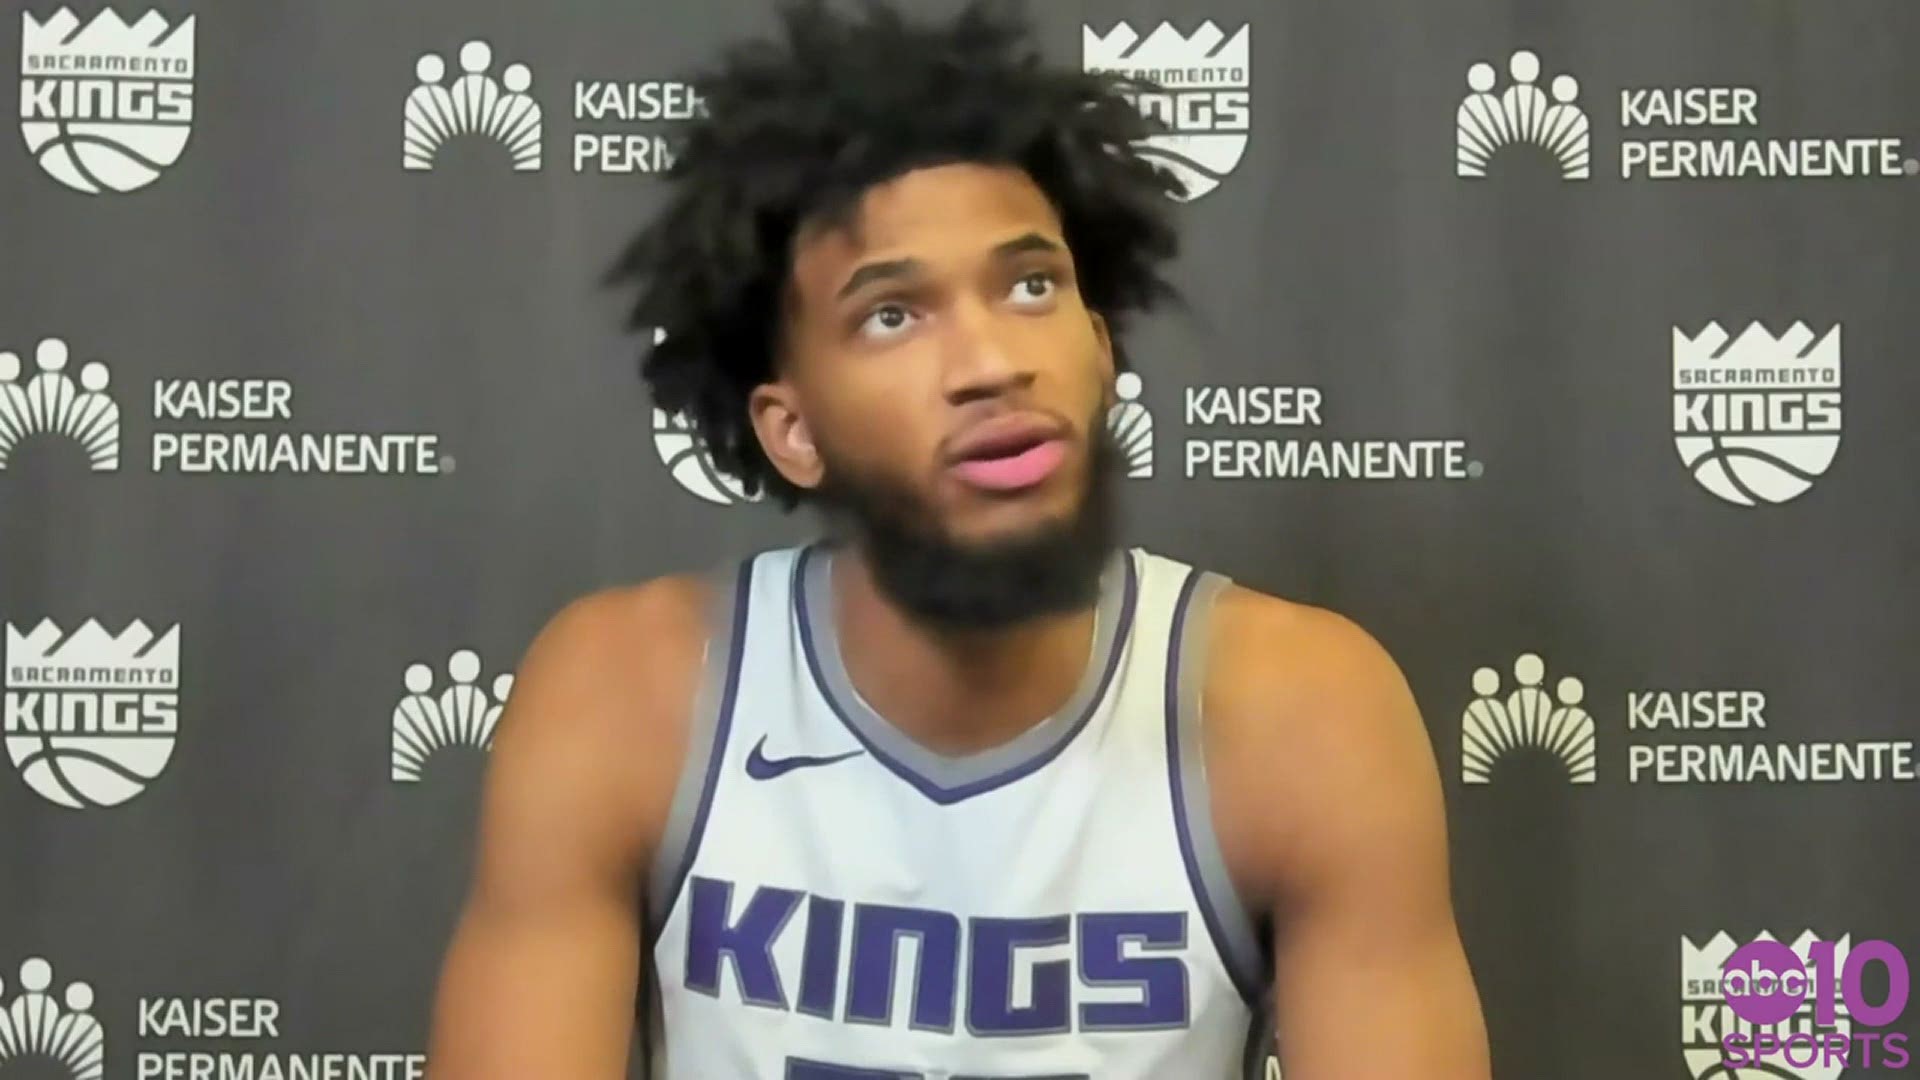 Marvin Bagley III airs his frustrations about another Kings loss, following Wednesday's defeat to the Clippers, and says he hates to lose & won't accept it.